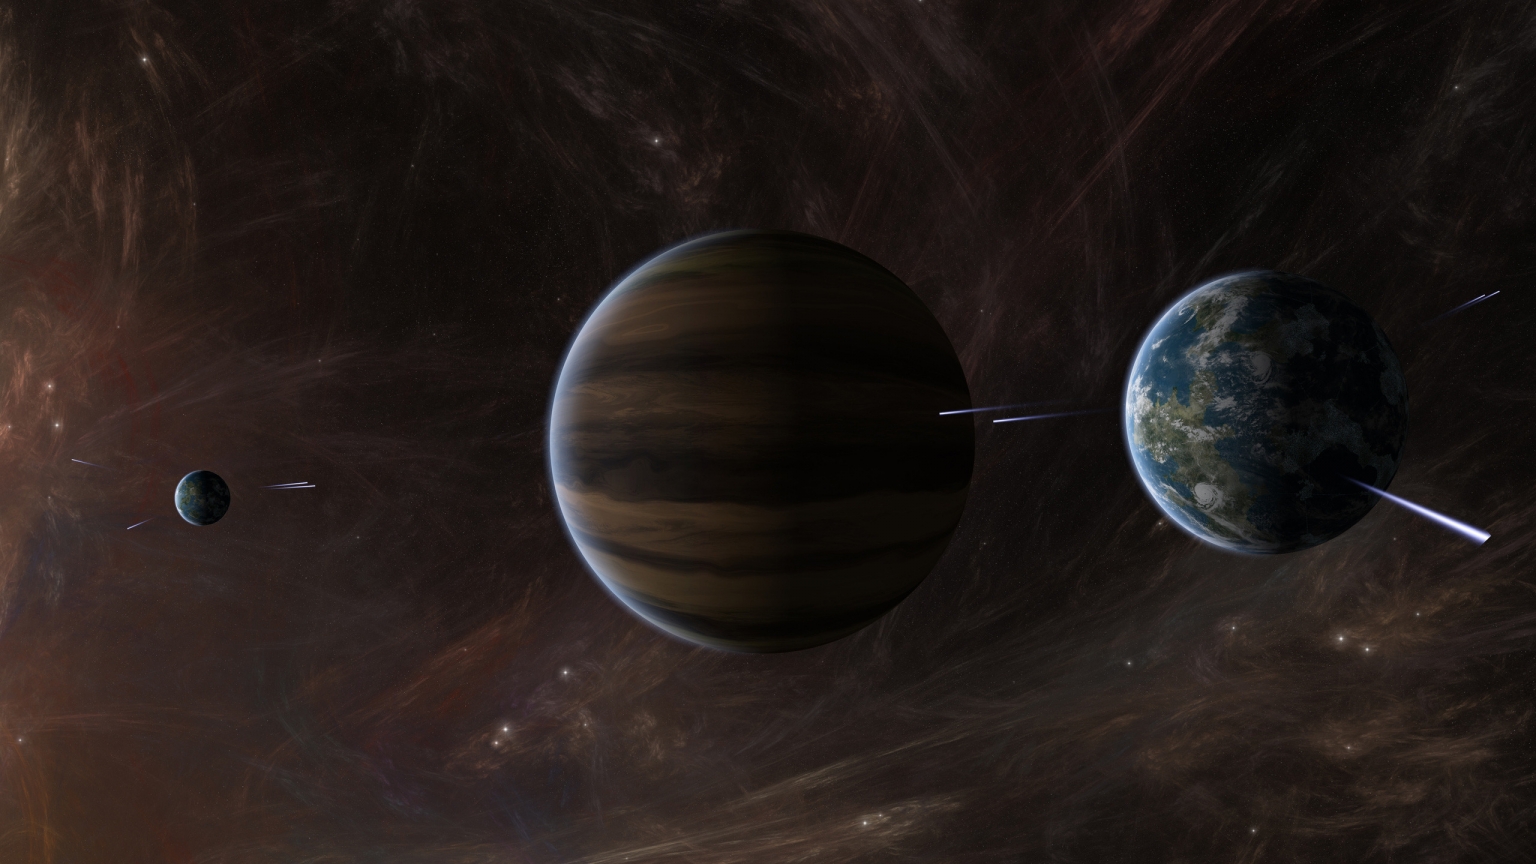 Space Planets Activity for 1536 x 864 HDTV resolution